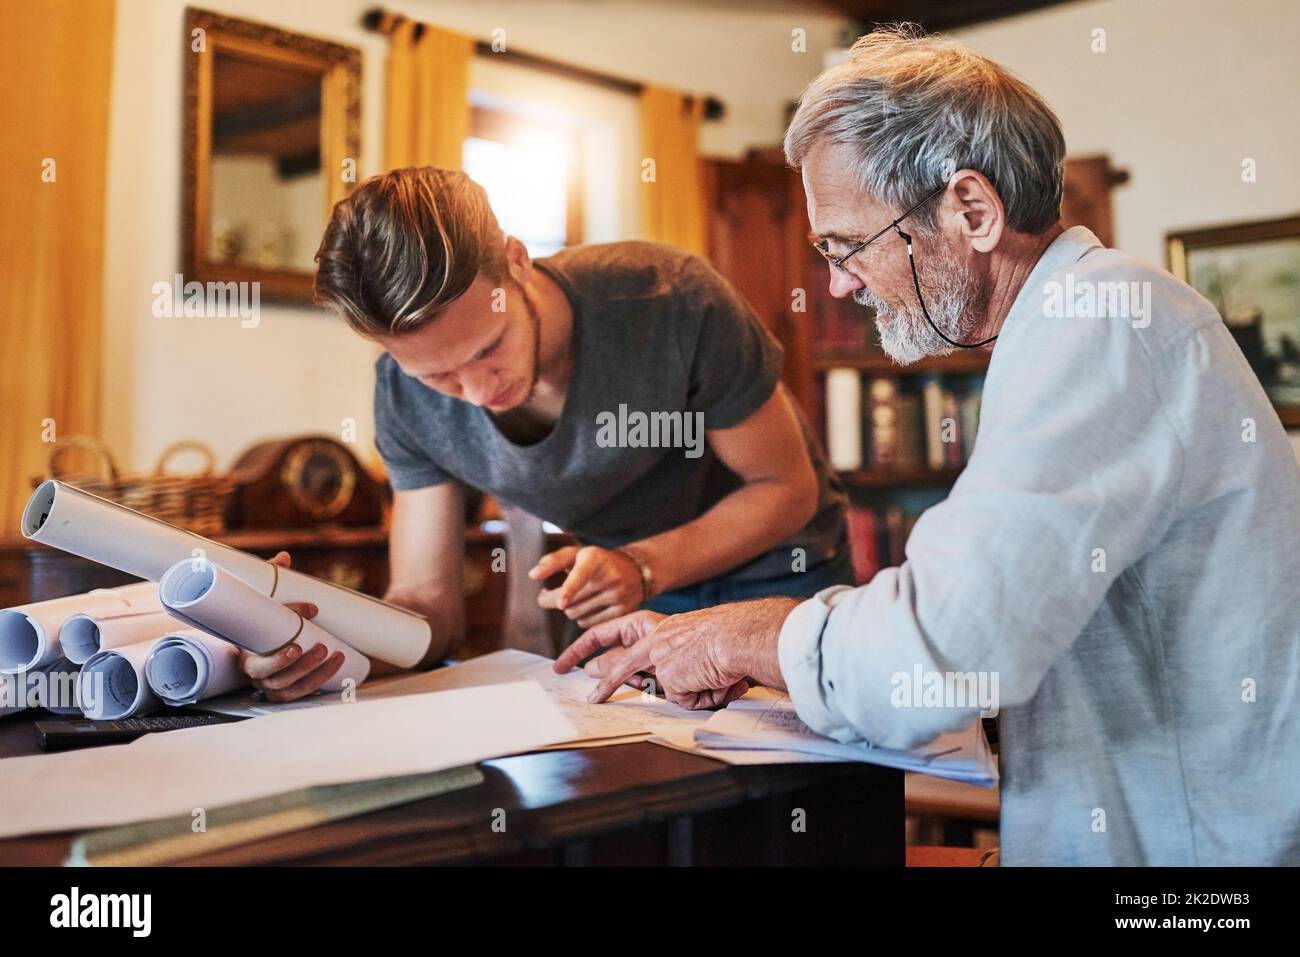 Hes joining the family business. Shot of two men working on a project together at home. Stock Photo